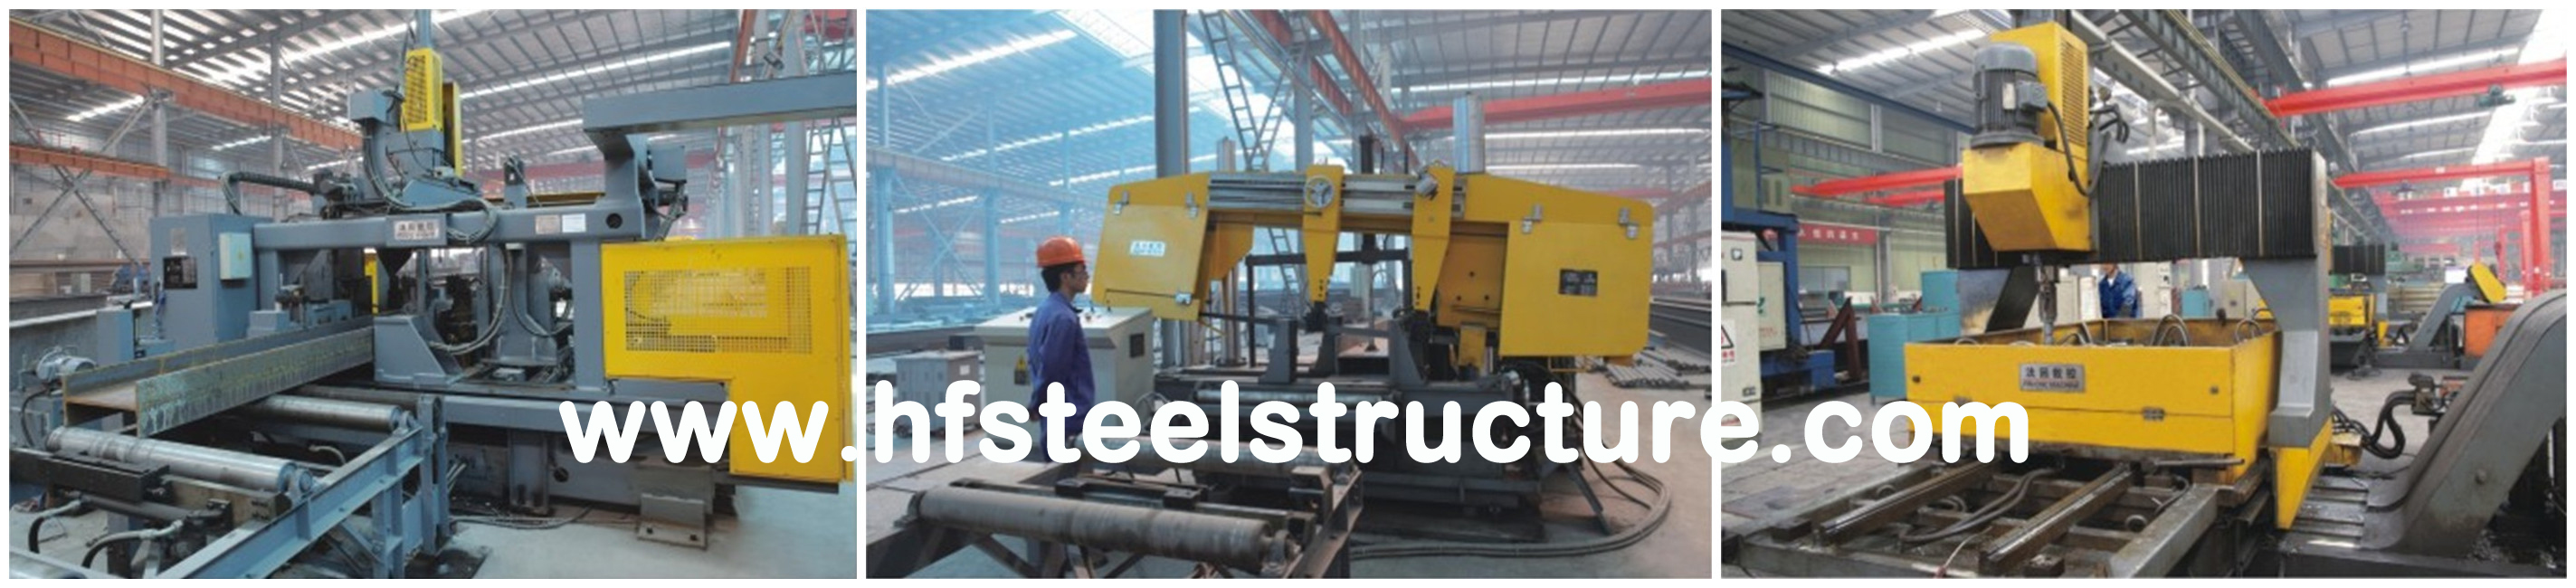 Portal Frame Industrial Steel Buildings Fabrication With Q235 Q345 Material